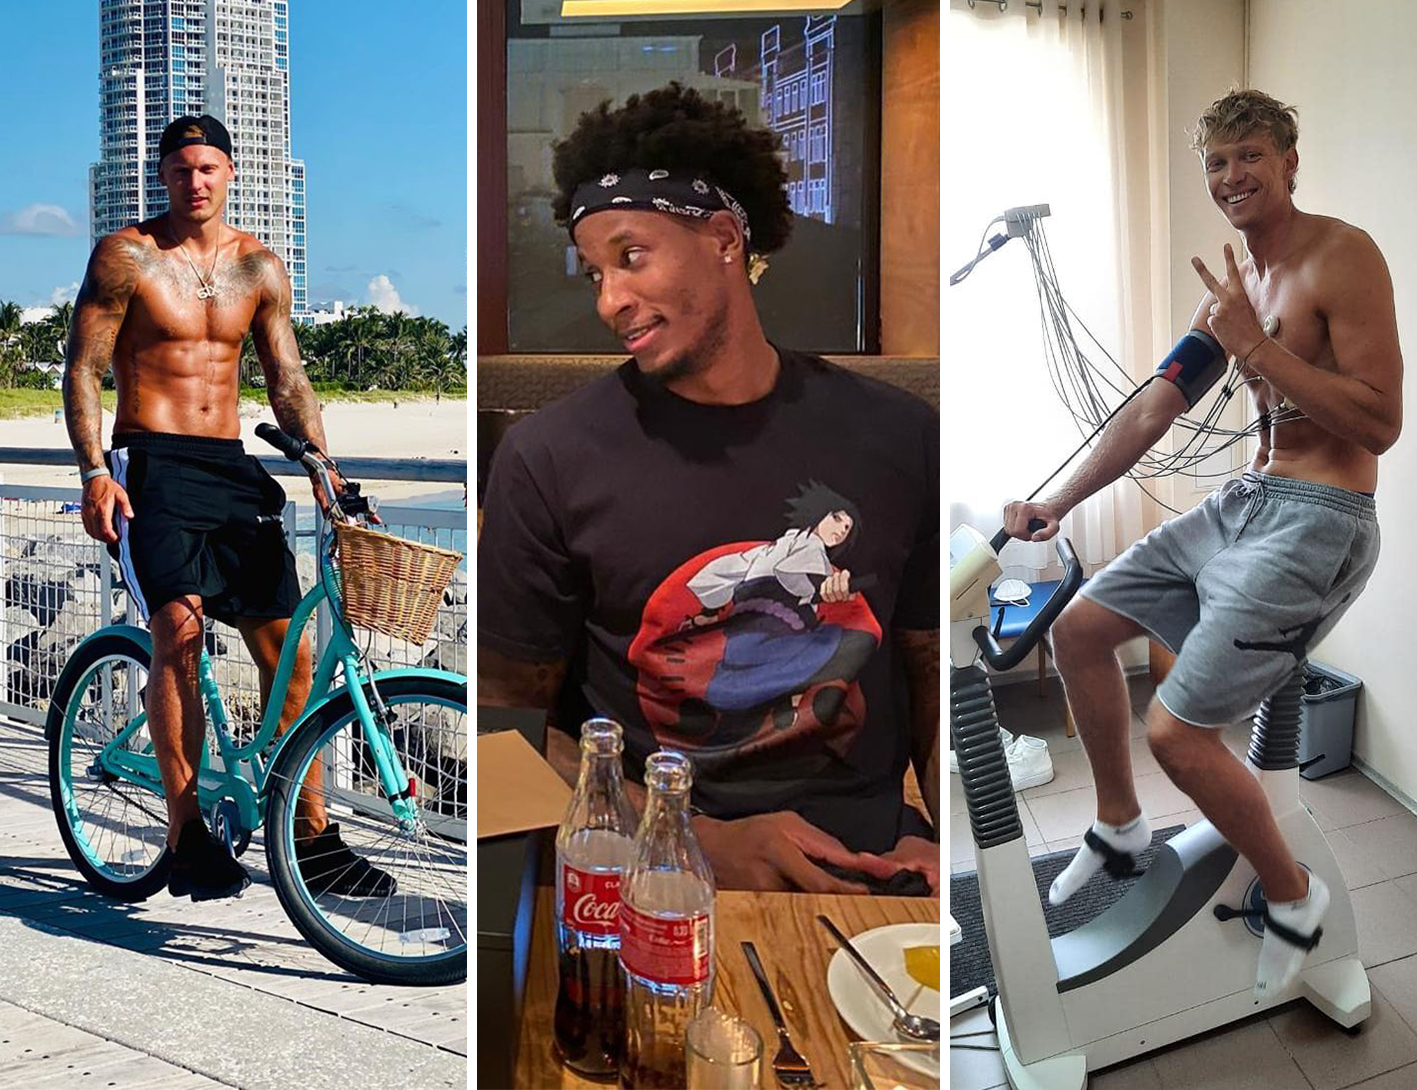 Cycling, first games and meeting old friends. Players on social media in August